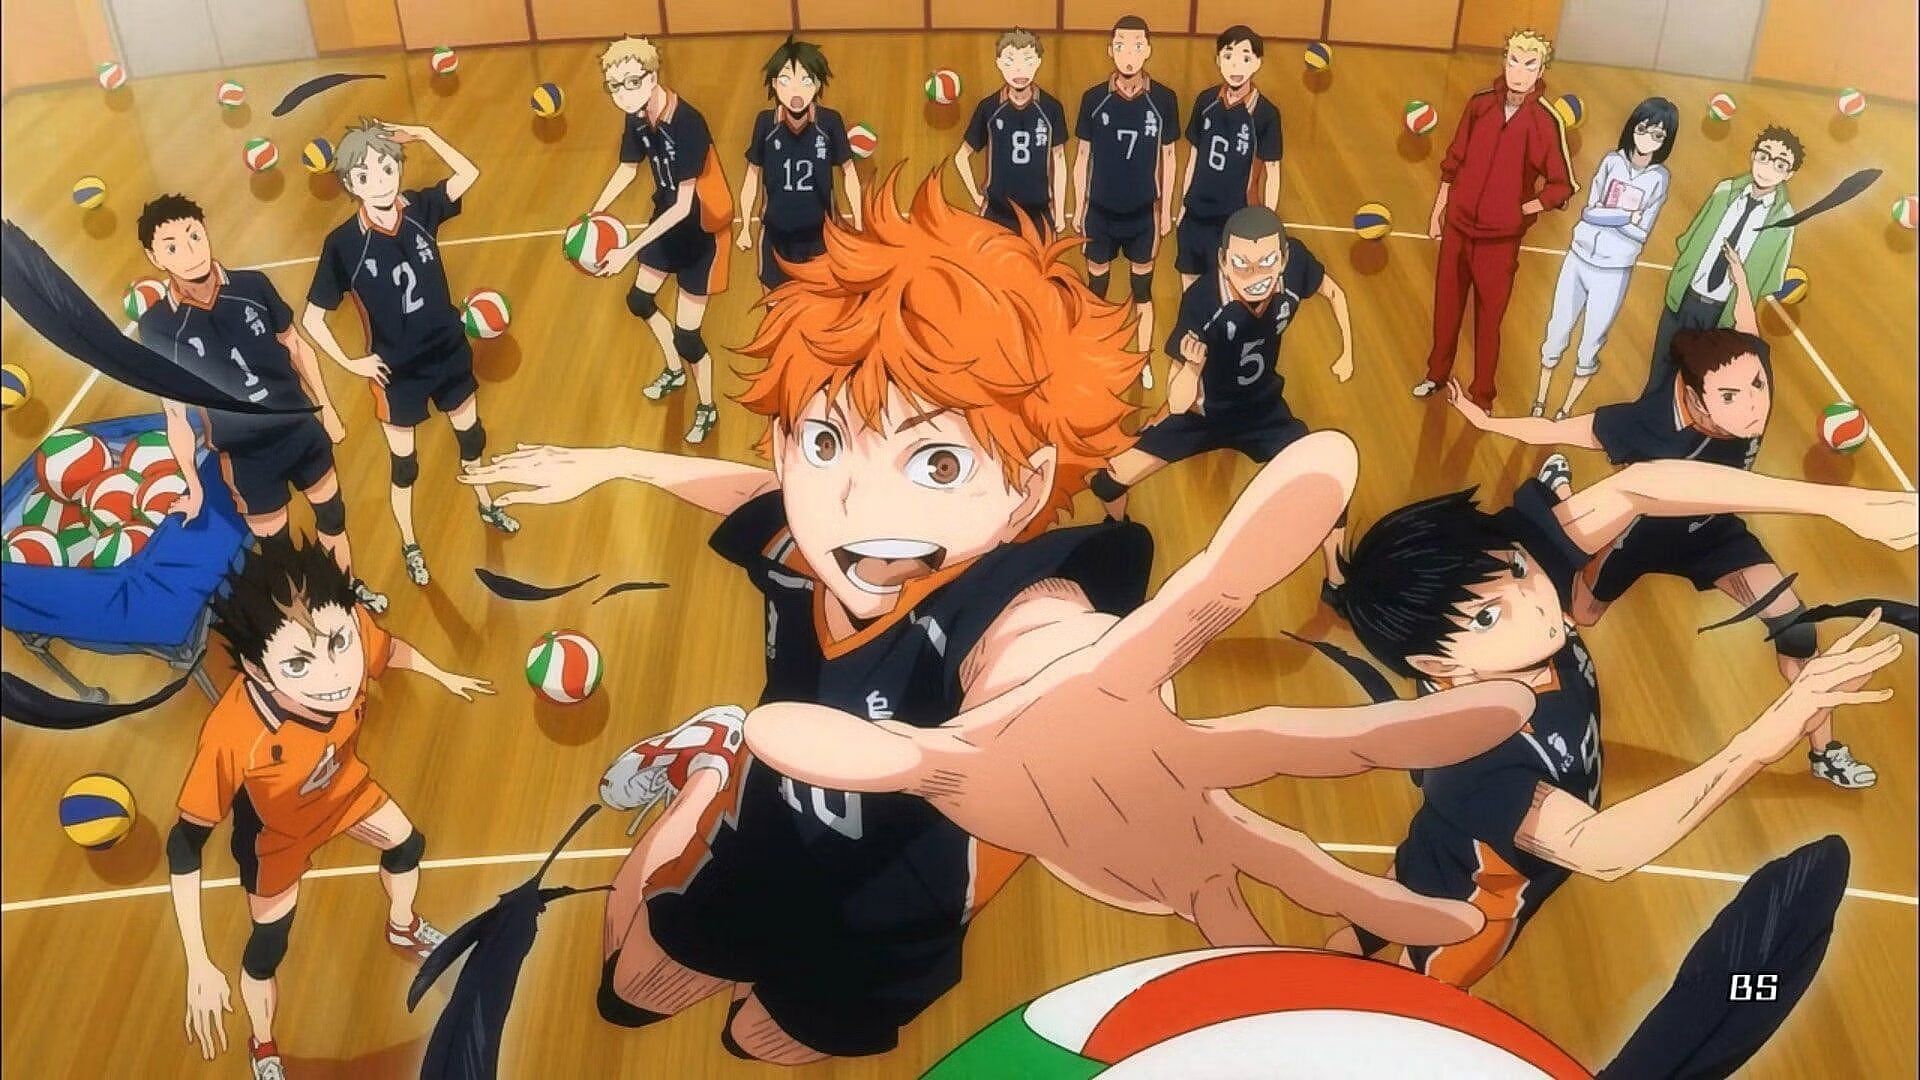 Haikyuu!! is getting a special manga chapter (Image via Production I.G.)